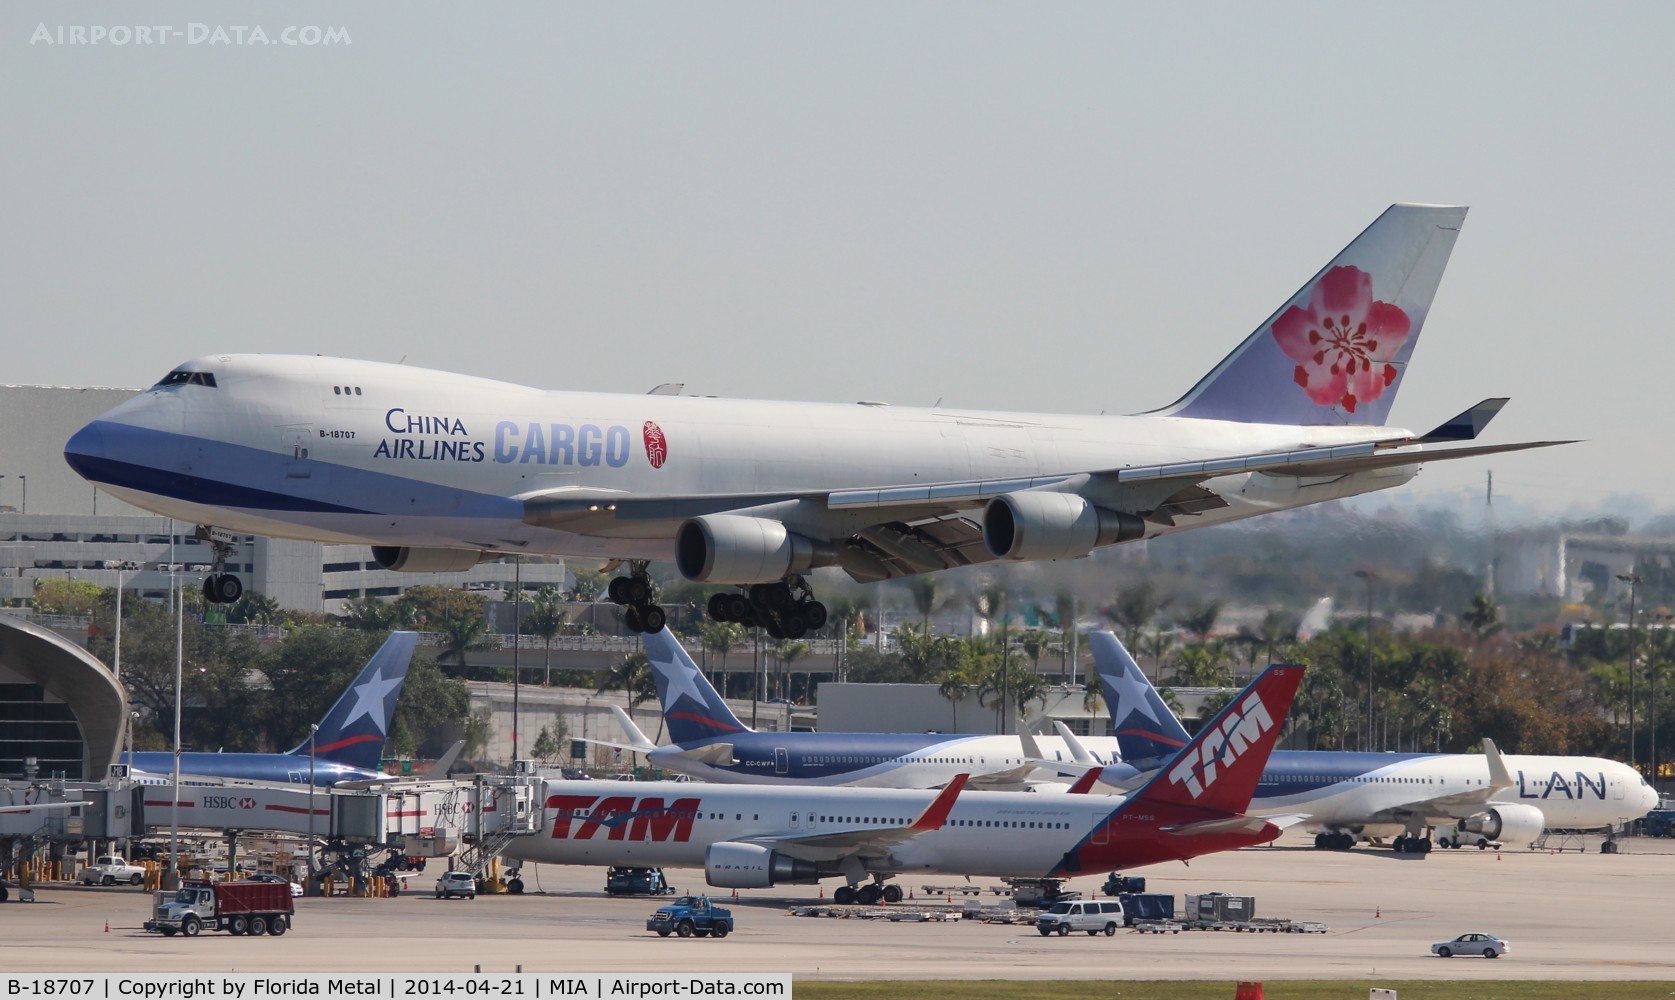 B-18707, 2001 Boeing 747-409F/SCD C/N 30764, China Airlines Cargo